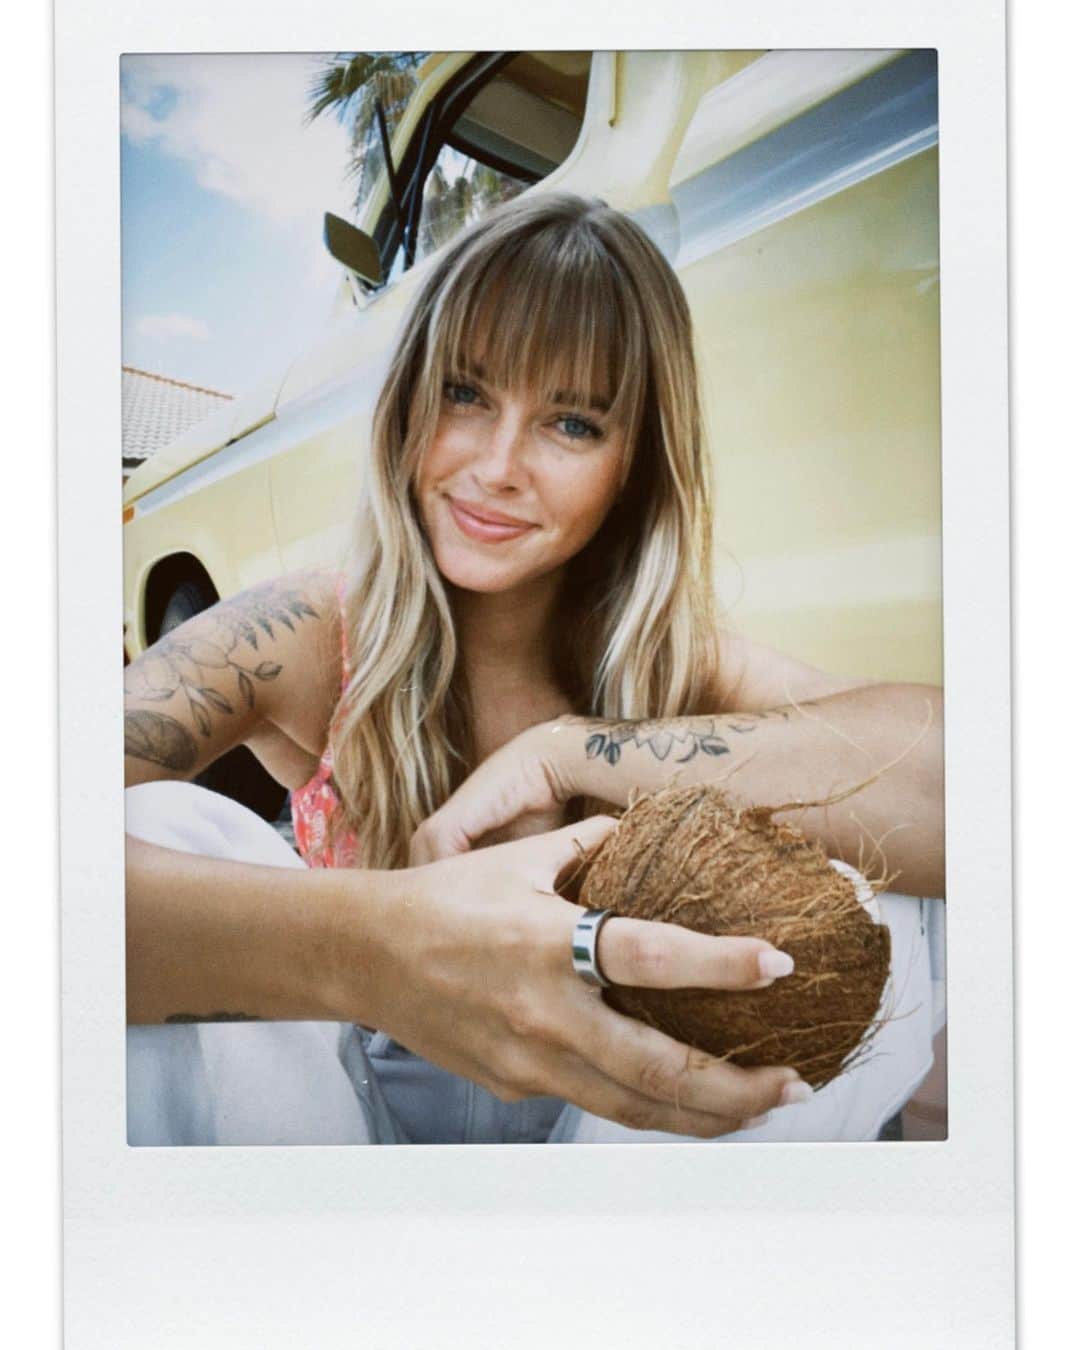 Emily Zeckのインスタグラム：「Coo-coo for coconuts」